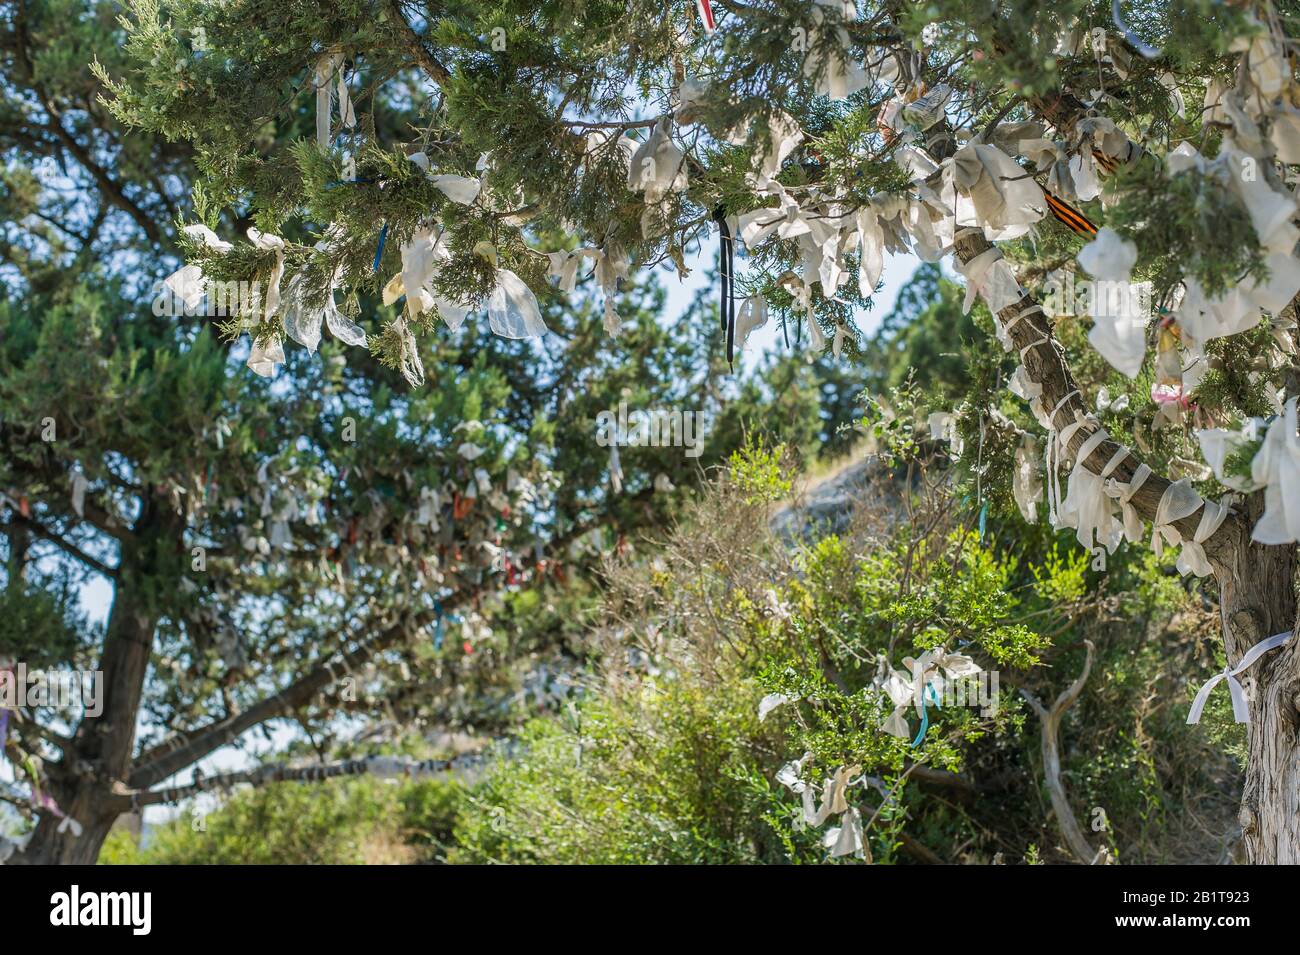 Woman and tree for tourists in the Genoese fortress in Crimea with branches decorated with knotted fabric ribbons Stock Photo